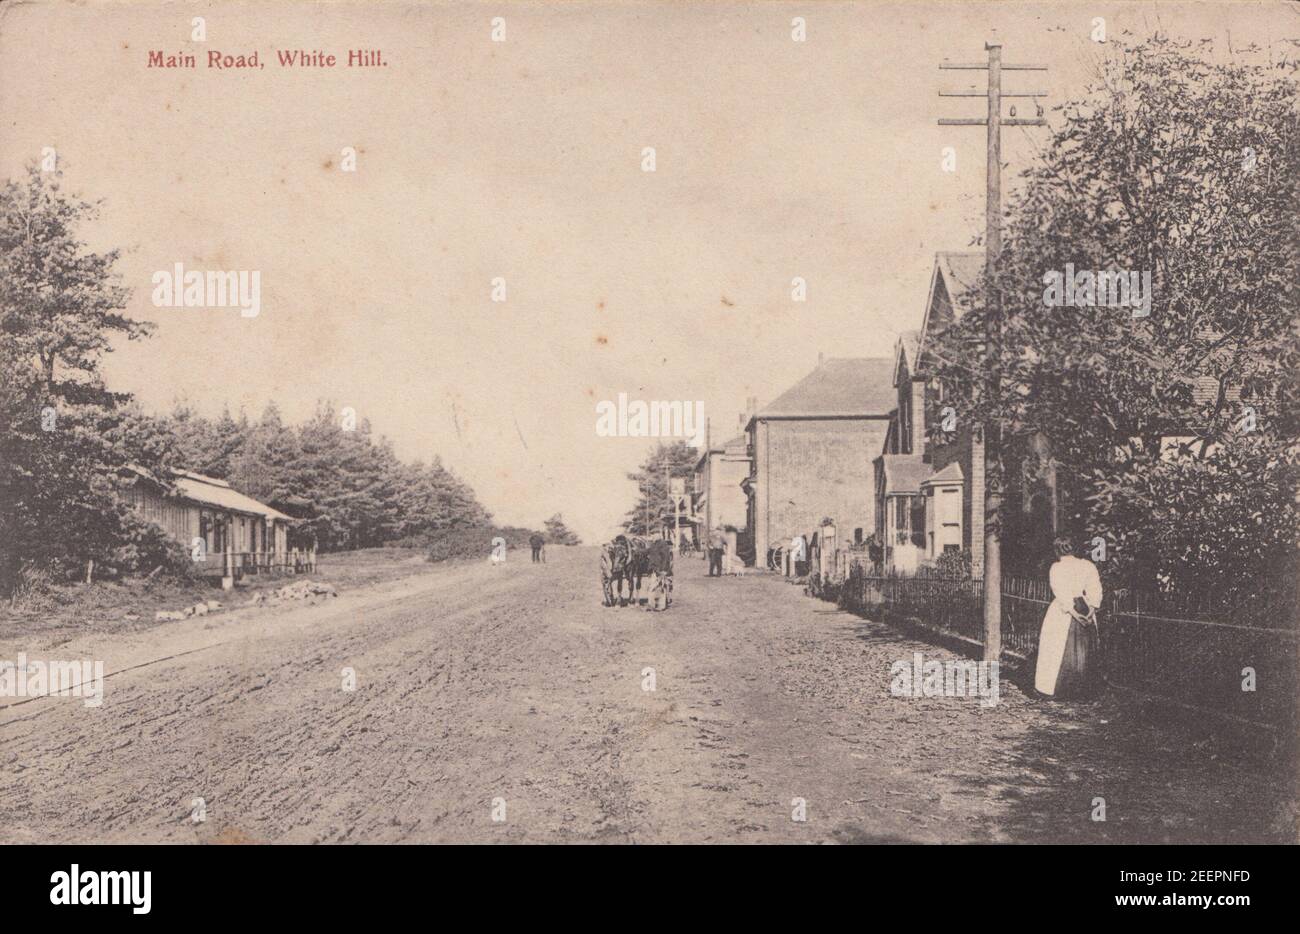 Vintage postcard Showing The Main Road, Whitehill, Hampshire, England. Police Station Visible on The Left. Stock Photo